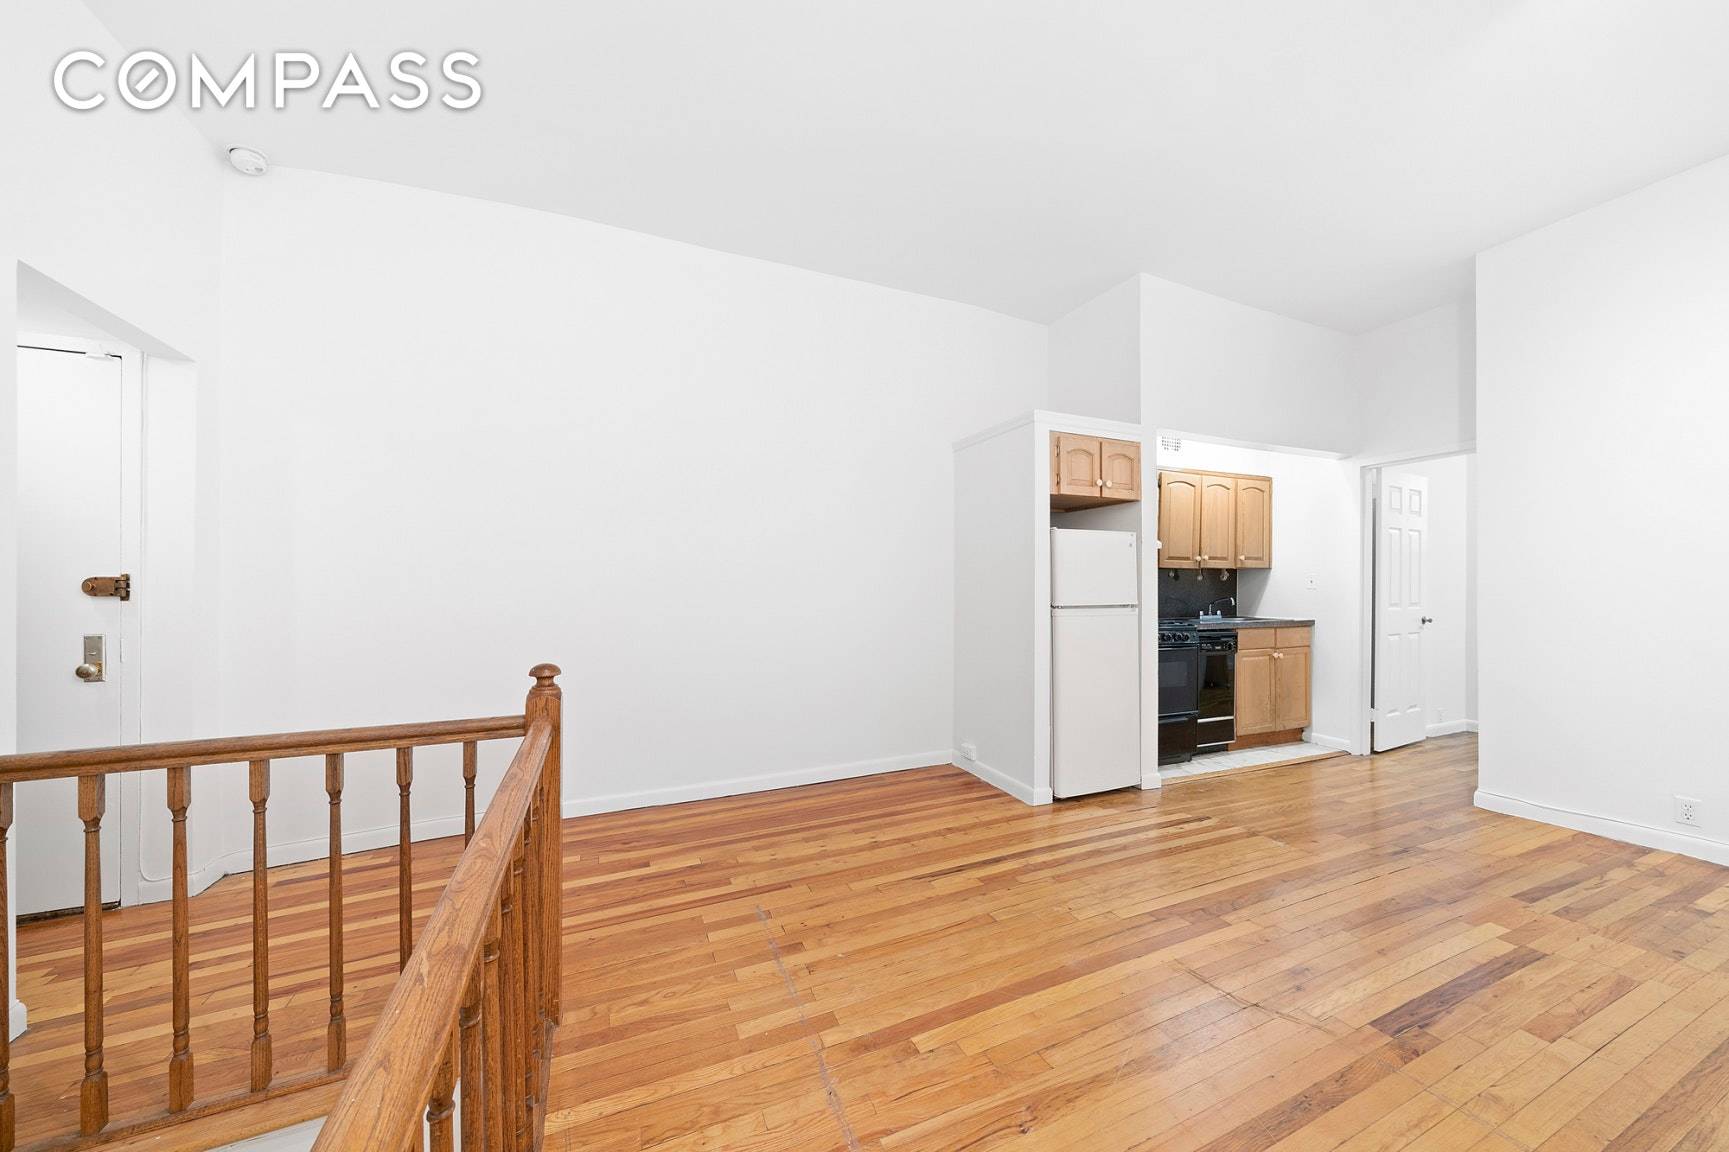 This totally unique, duplex boasts high ceilings, beautiful floors, marble bathroom, kitchen with dishwasher and tons of closets and storage.